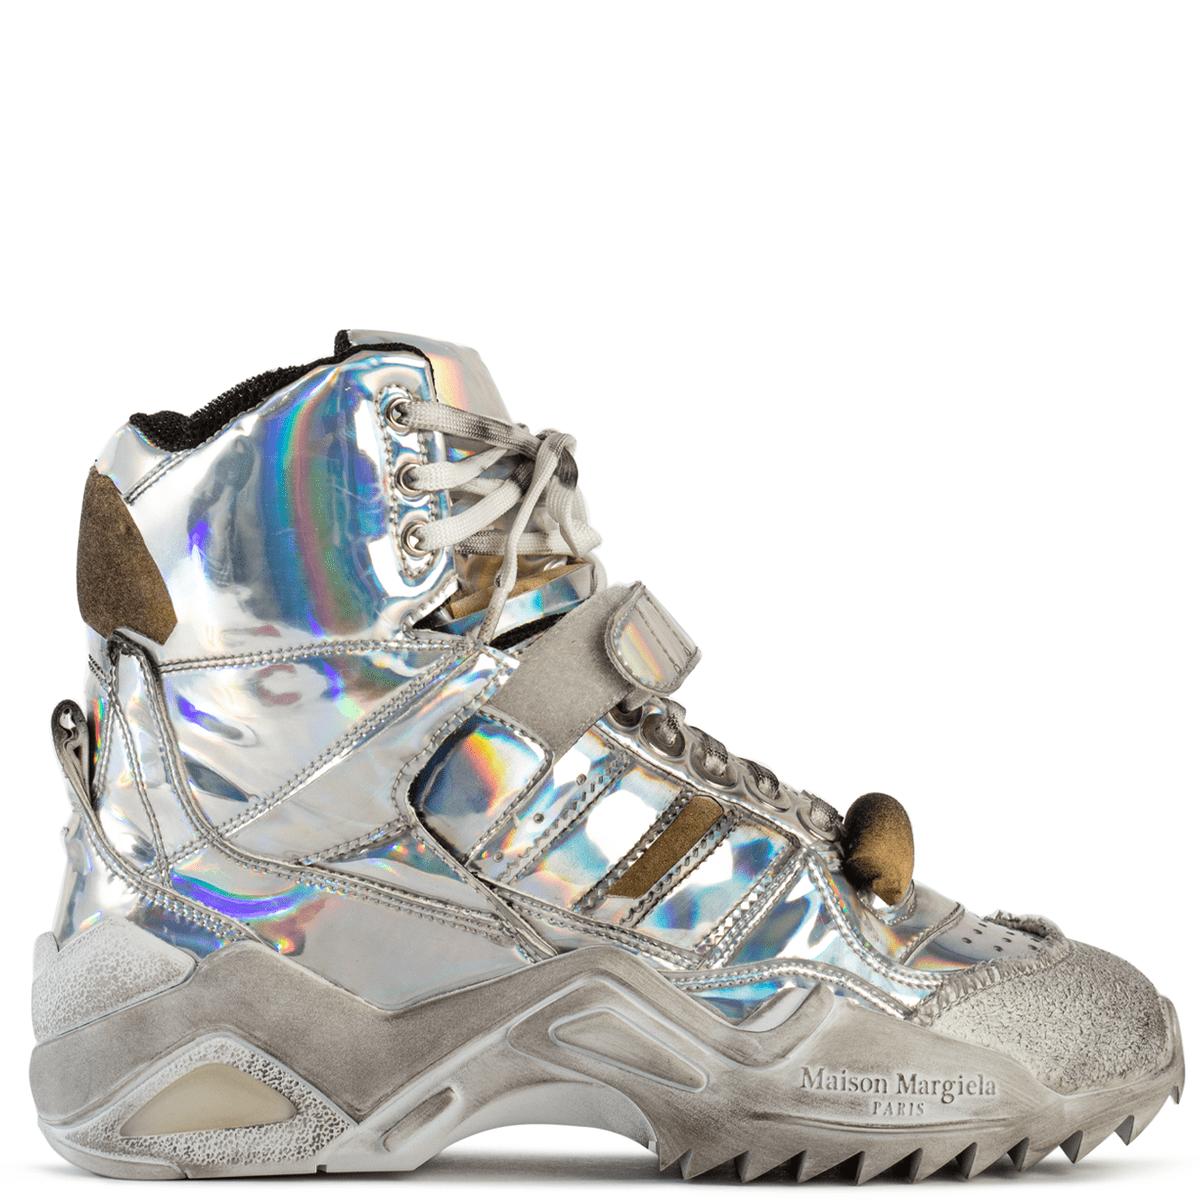 Maison Margiela Leather Deconstructed Hi-top Iridescent Sneakers in Silver  (Metallic) - Lyst